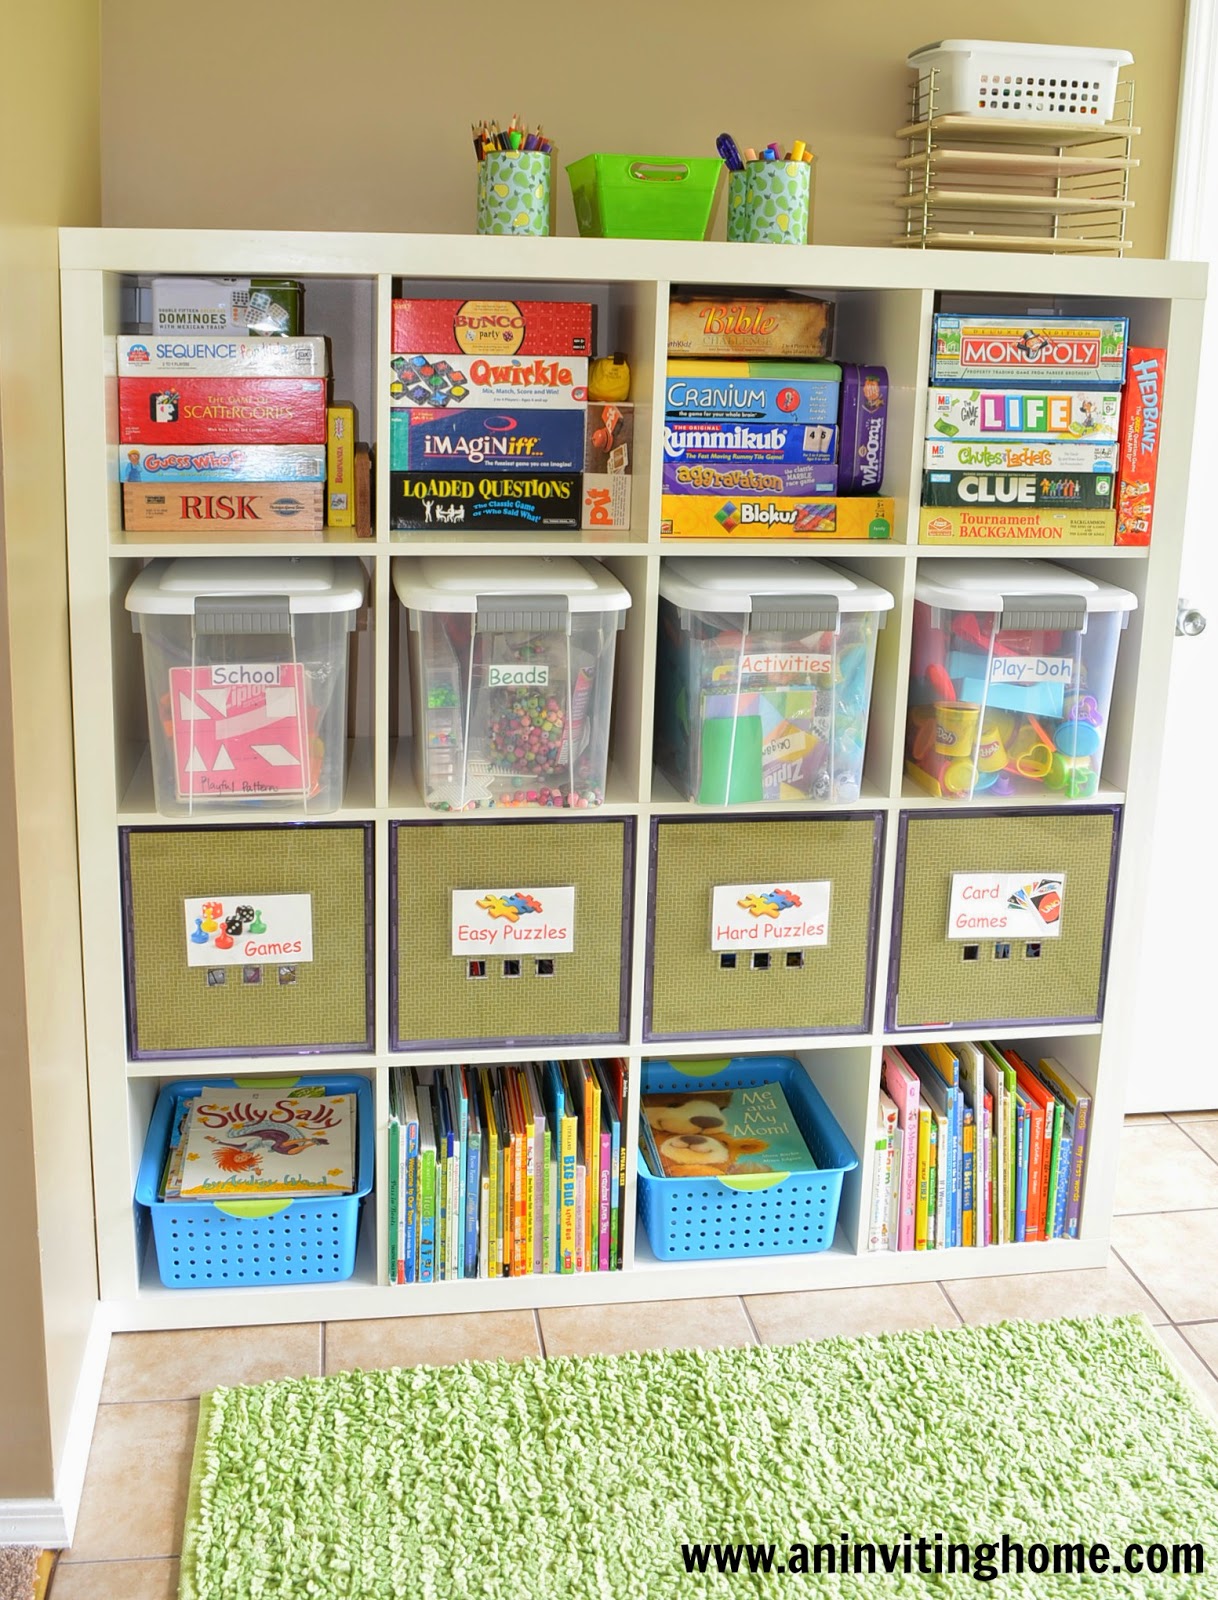 An Inviting Home: Our Inviting Space For Kids!